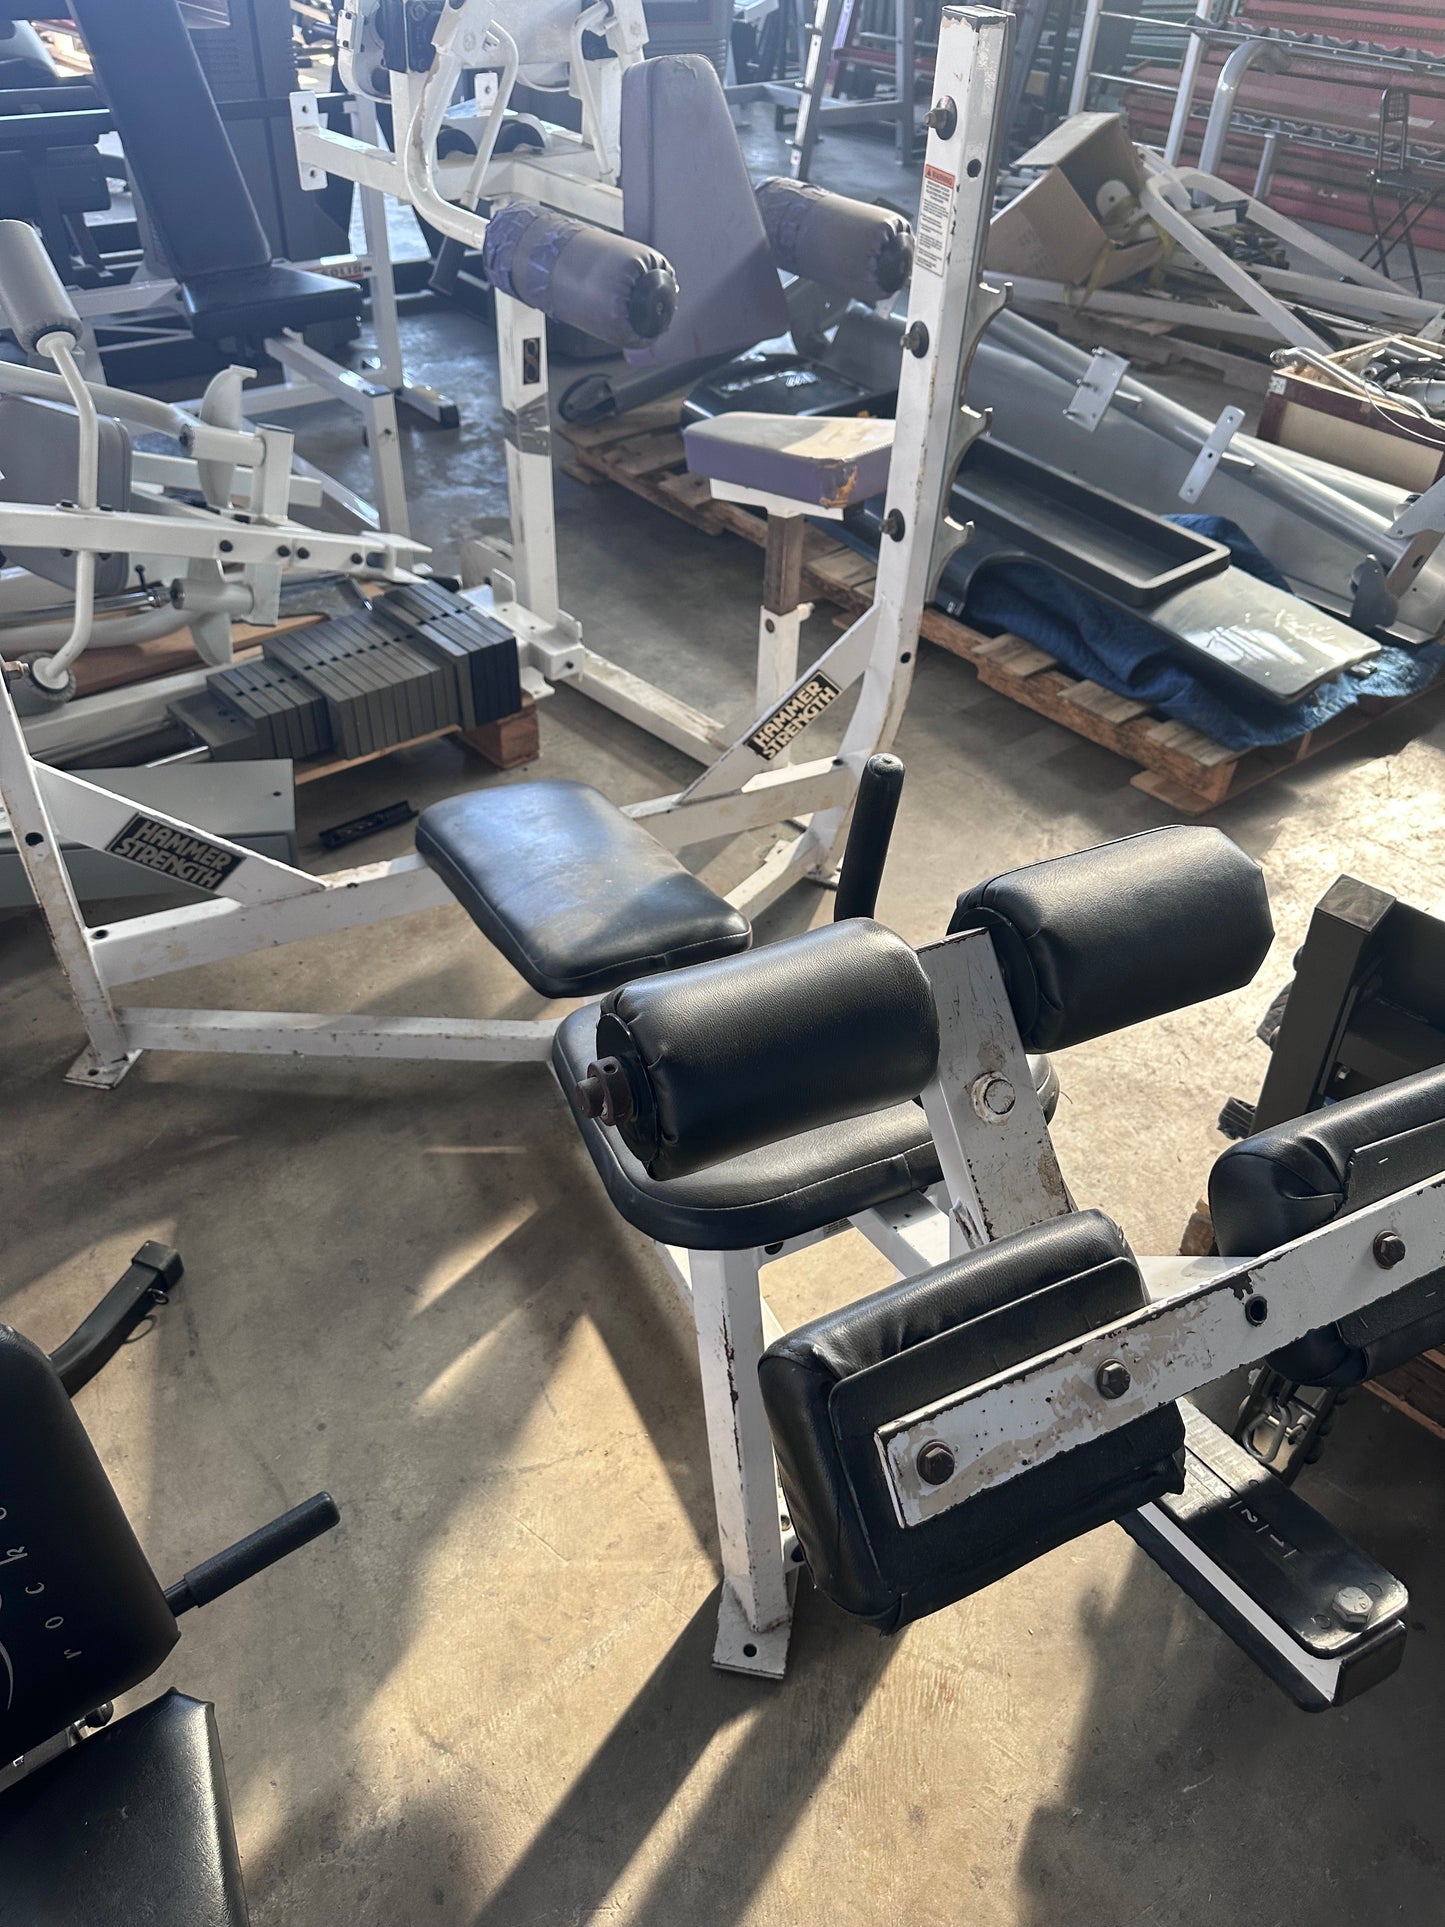 Pre-Owned Hammer Strength Decline Press - ExerciseUnlimited